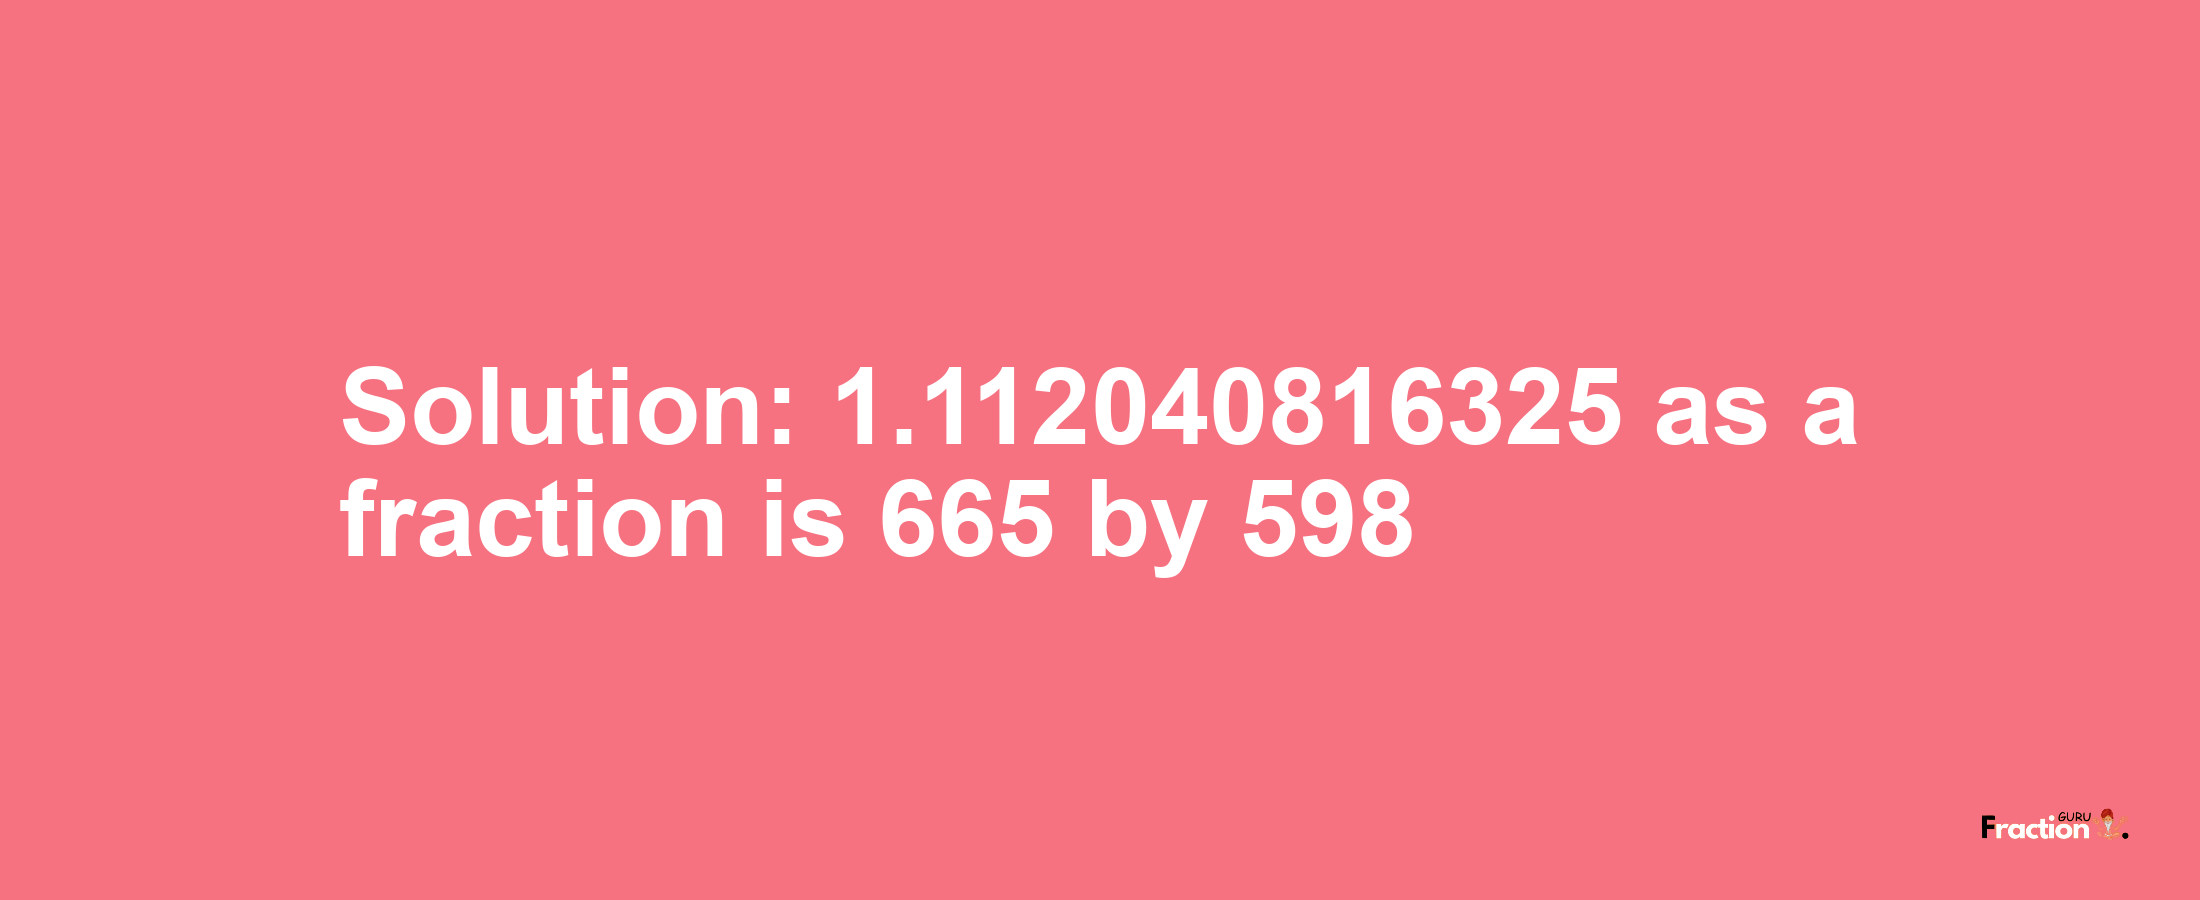 Solution:1.112040816325 as a fraction is 665/598